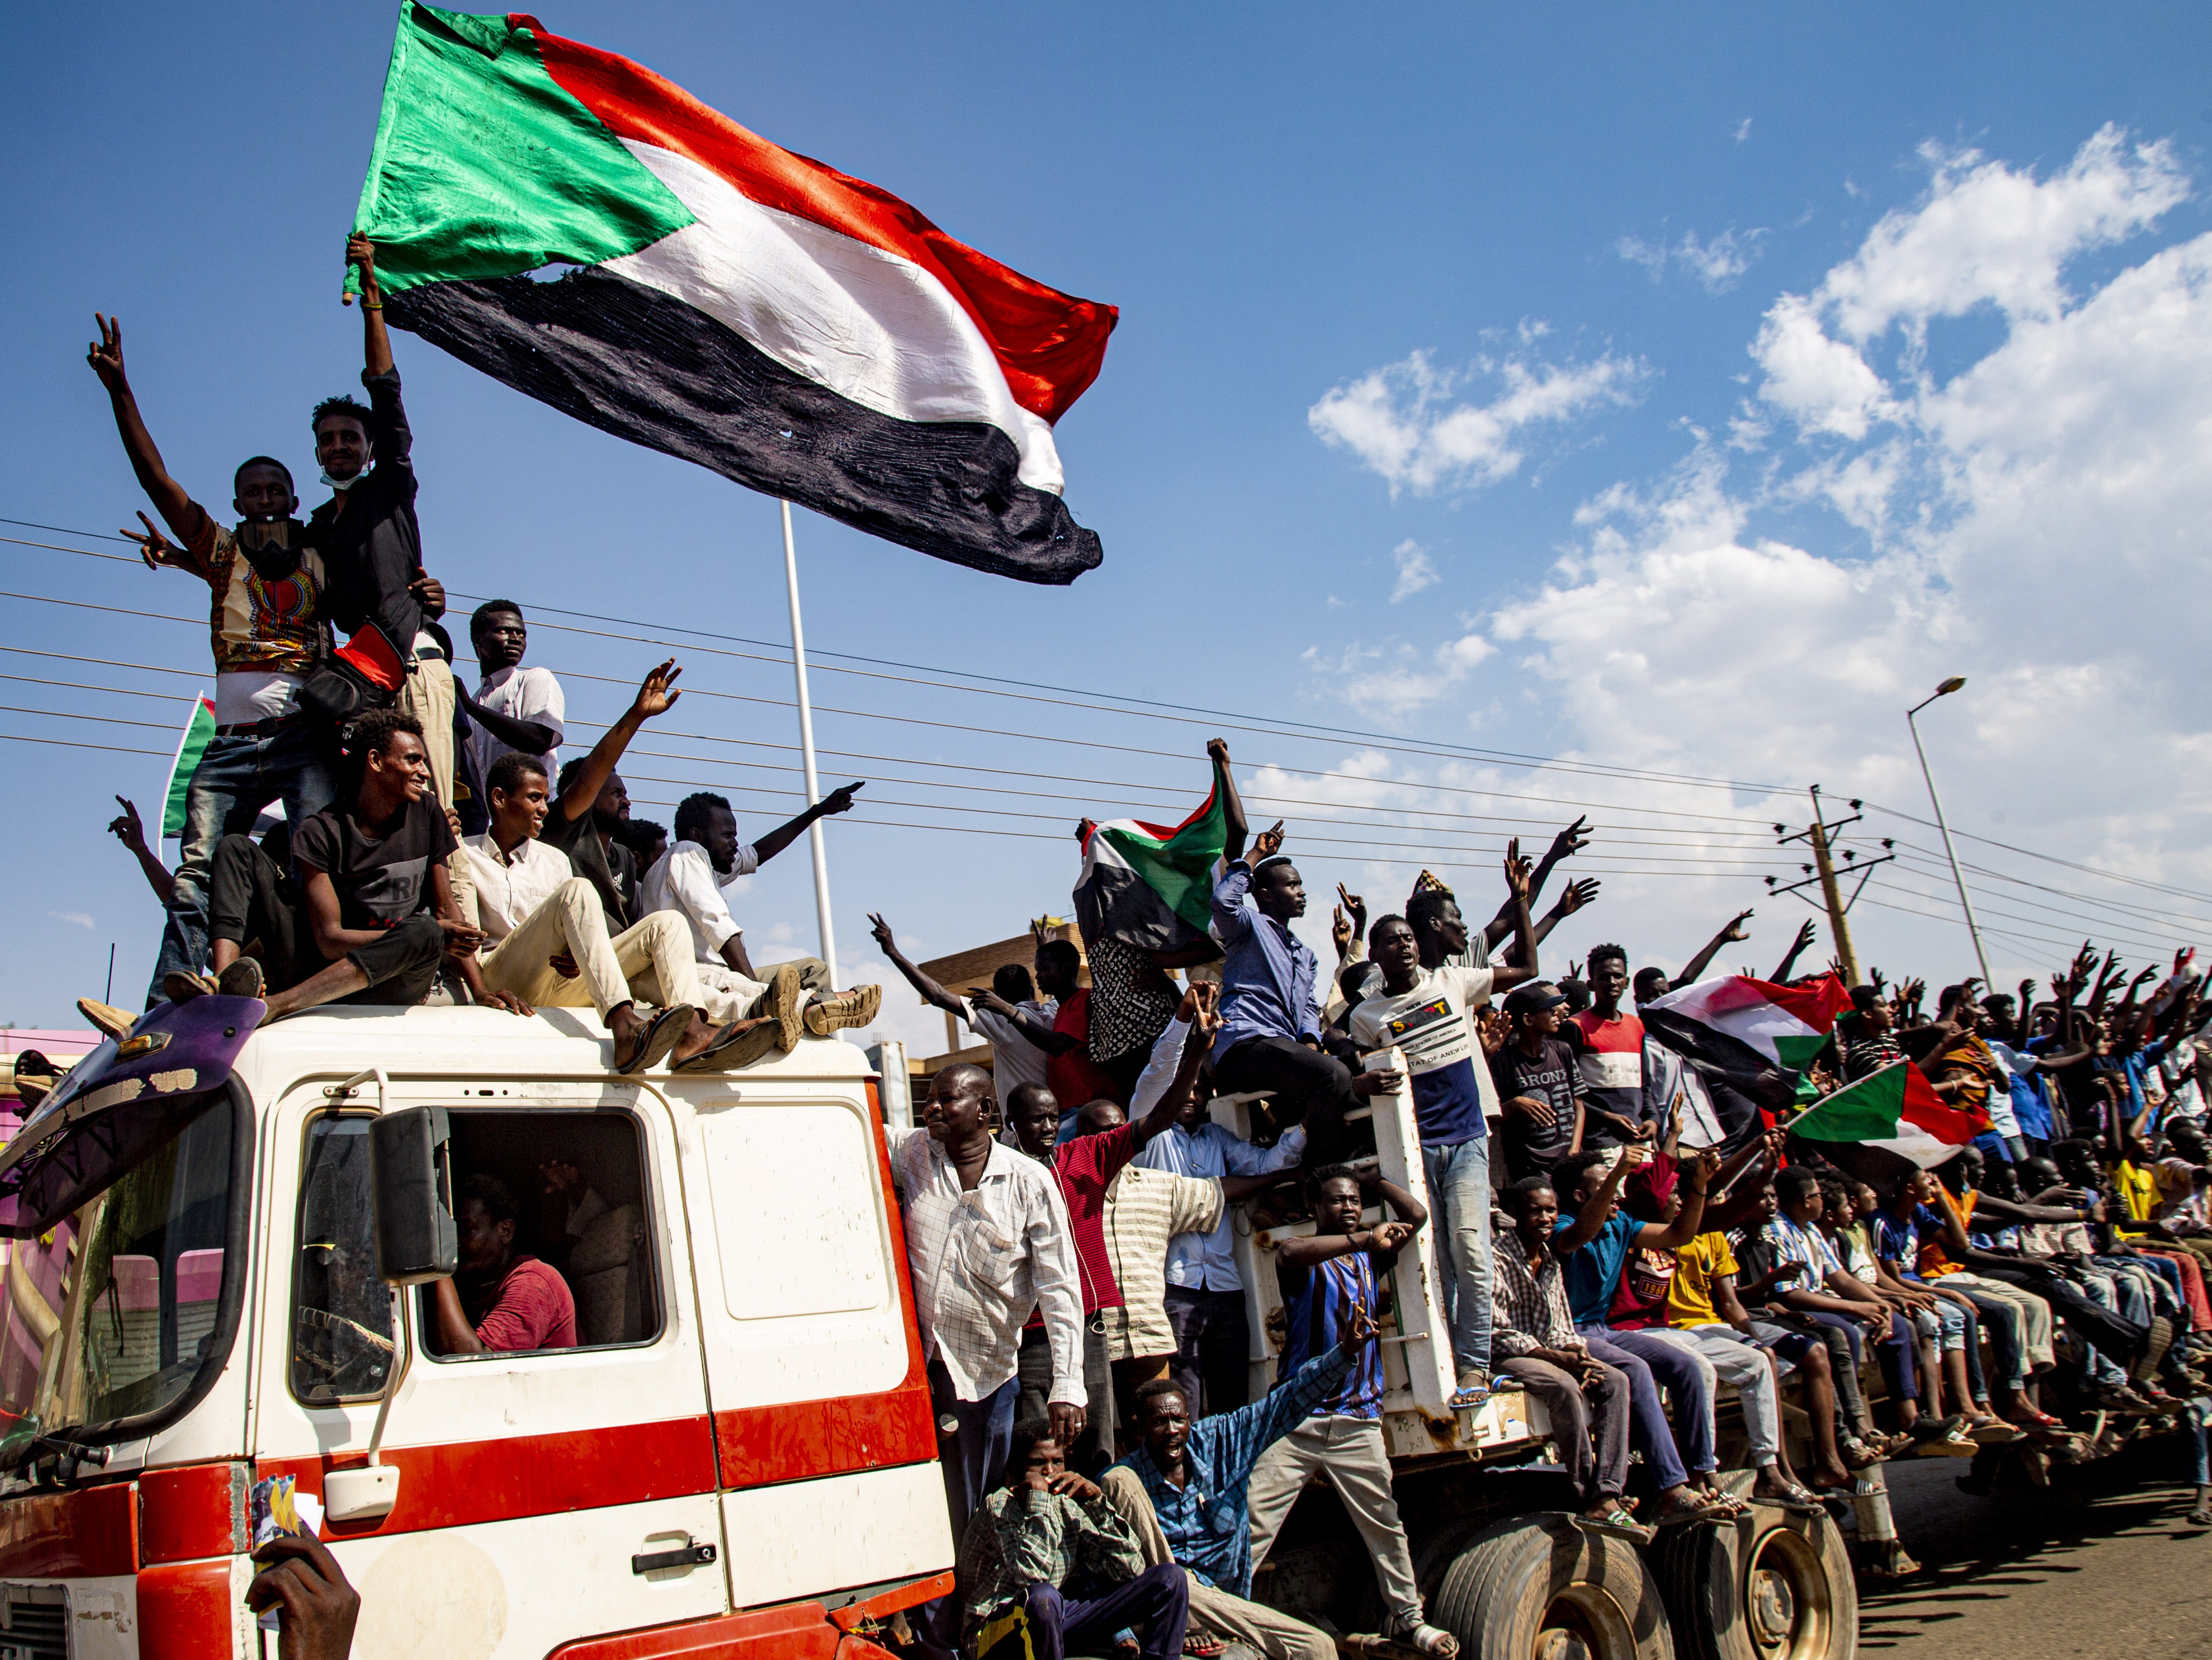 Demonstrators gather at a protest in Khartoum